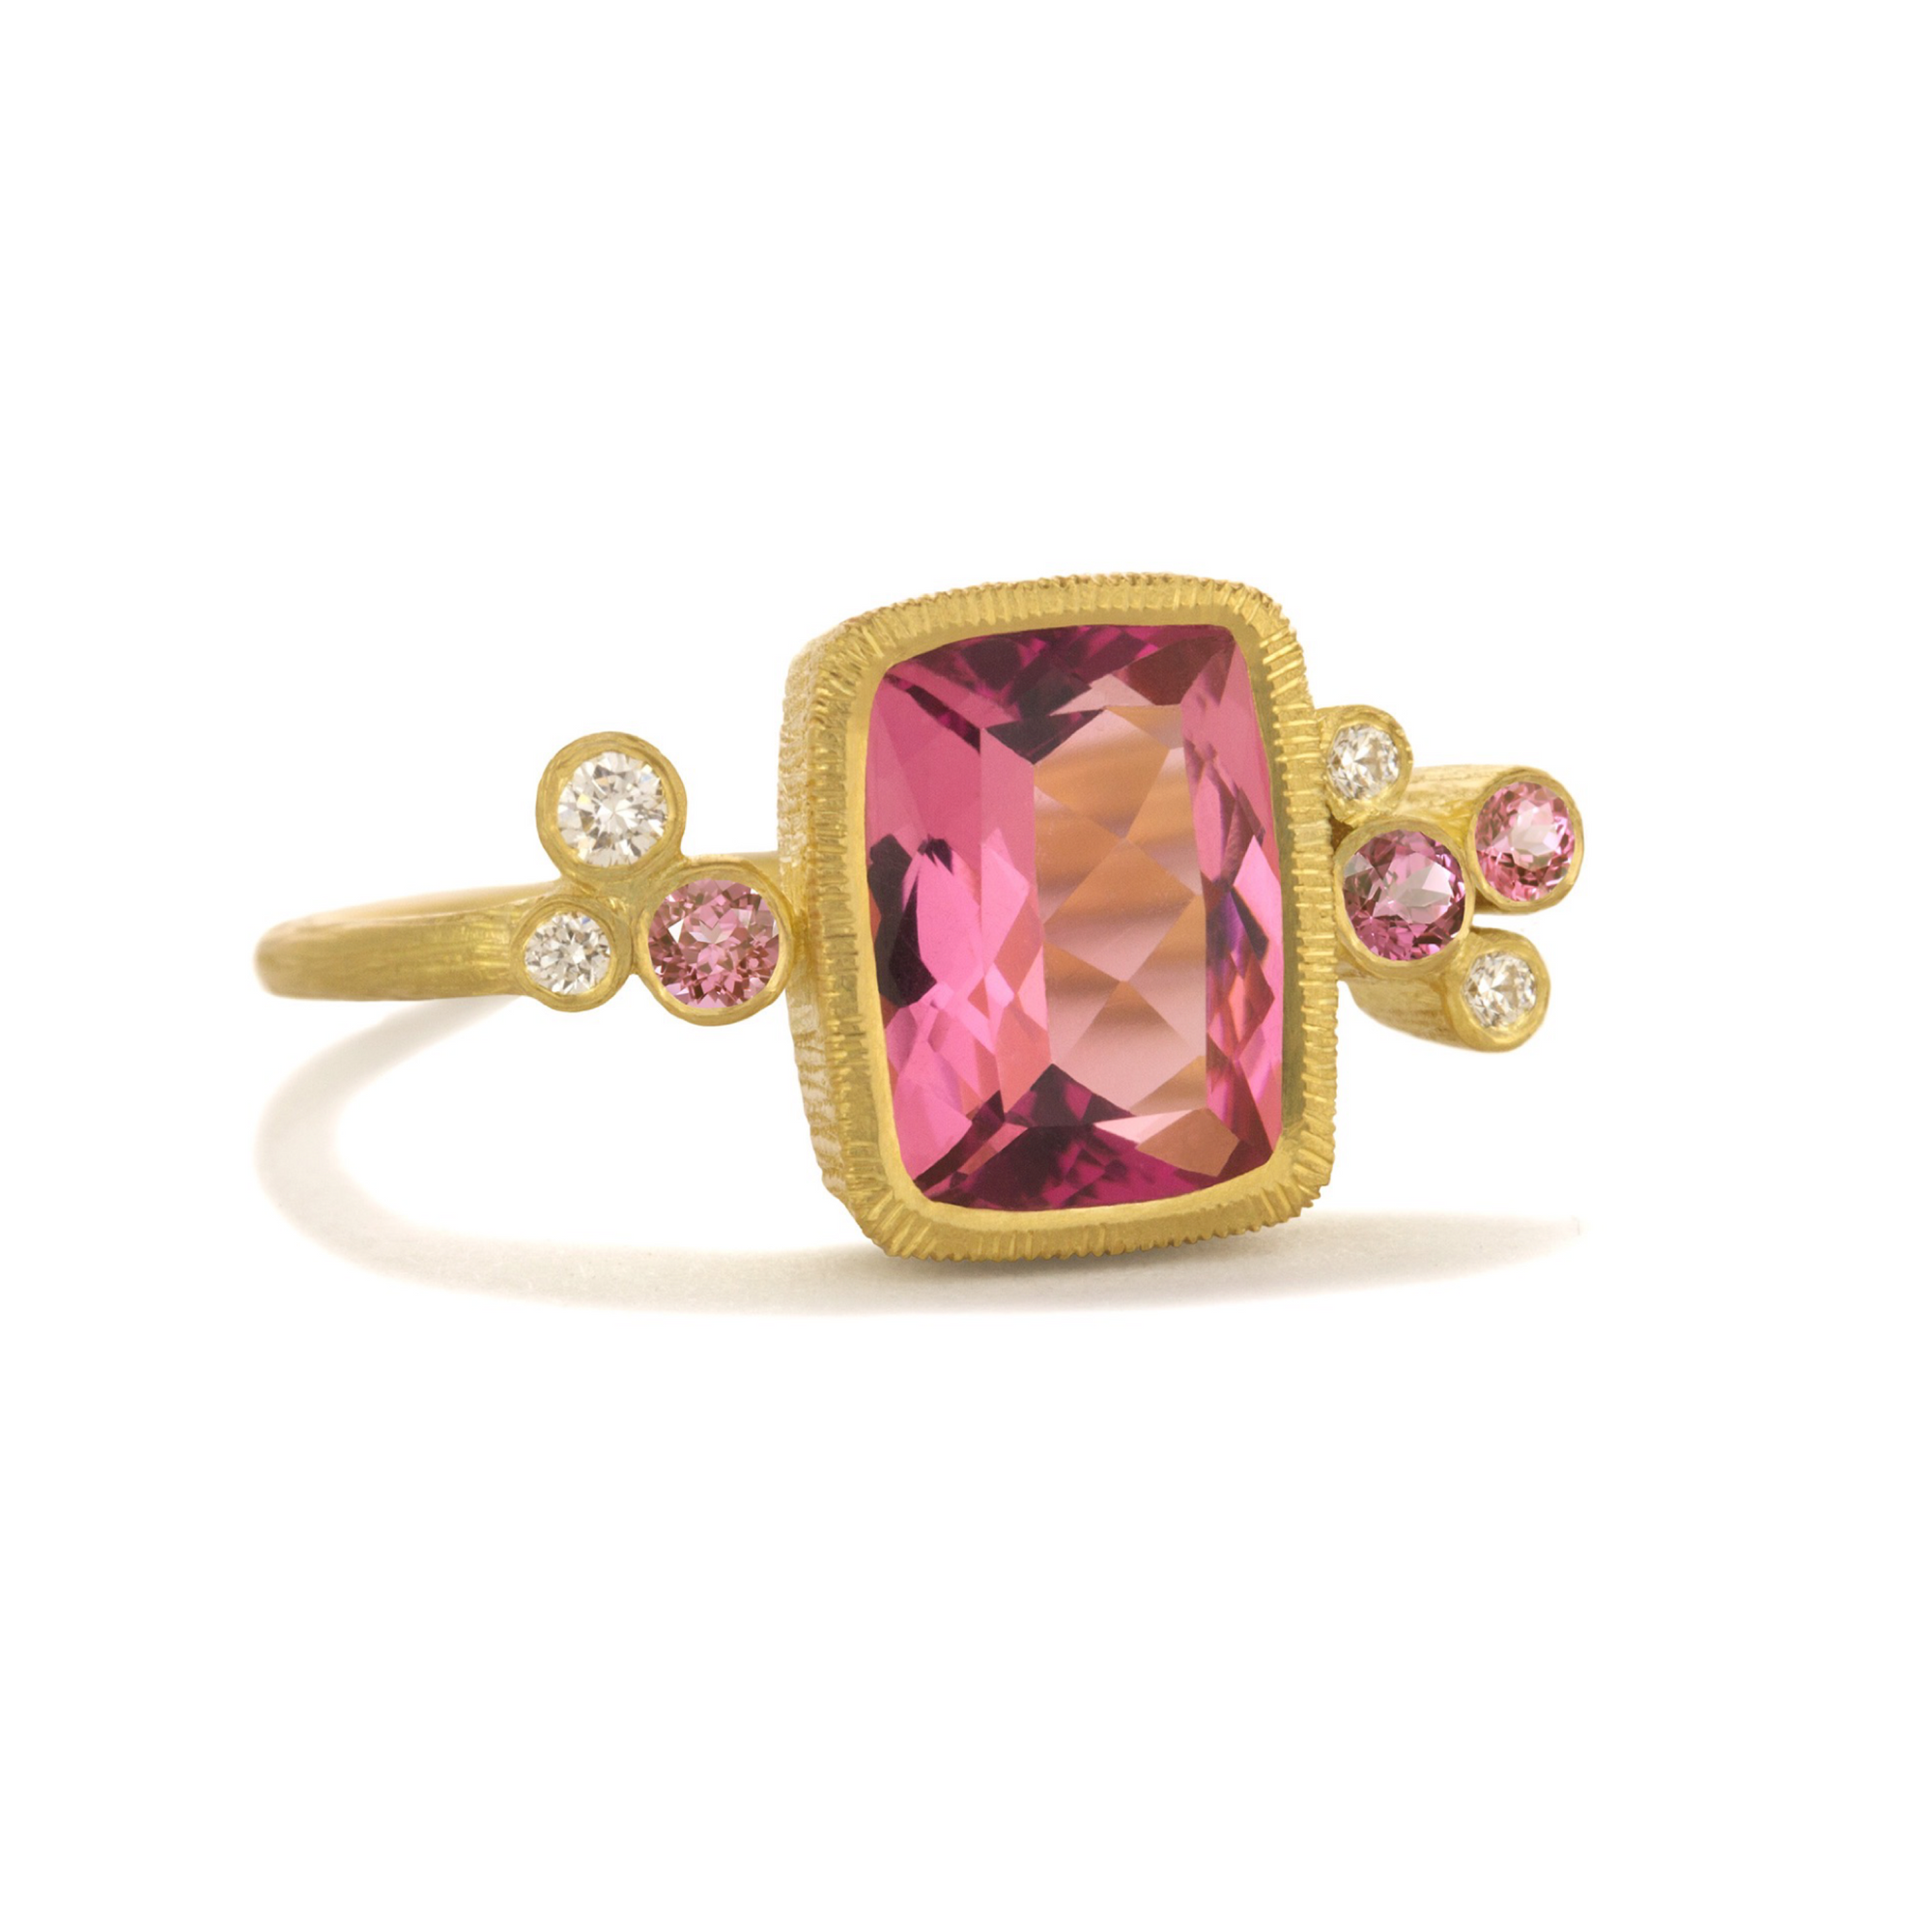 Pink Sprinkles Ring by Laurie Kaiser available at Talisman Collection Fine Jewelers in El Dorado Hills, CA and online. An emerald cut Brazilian pink fluorite takes center stage in the Pink Sprinkles Ring, while white diamonds (0.06 cts) and pink sapphires (0.10 cts) delicately frame the stone. Set in 18k yellow gold, this ring is perfect for adding a pop of color to any outfit. 